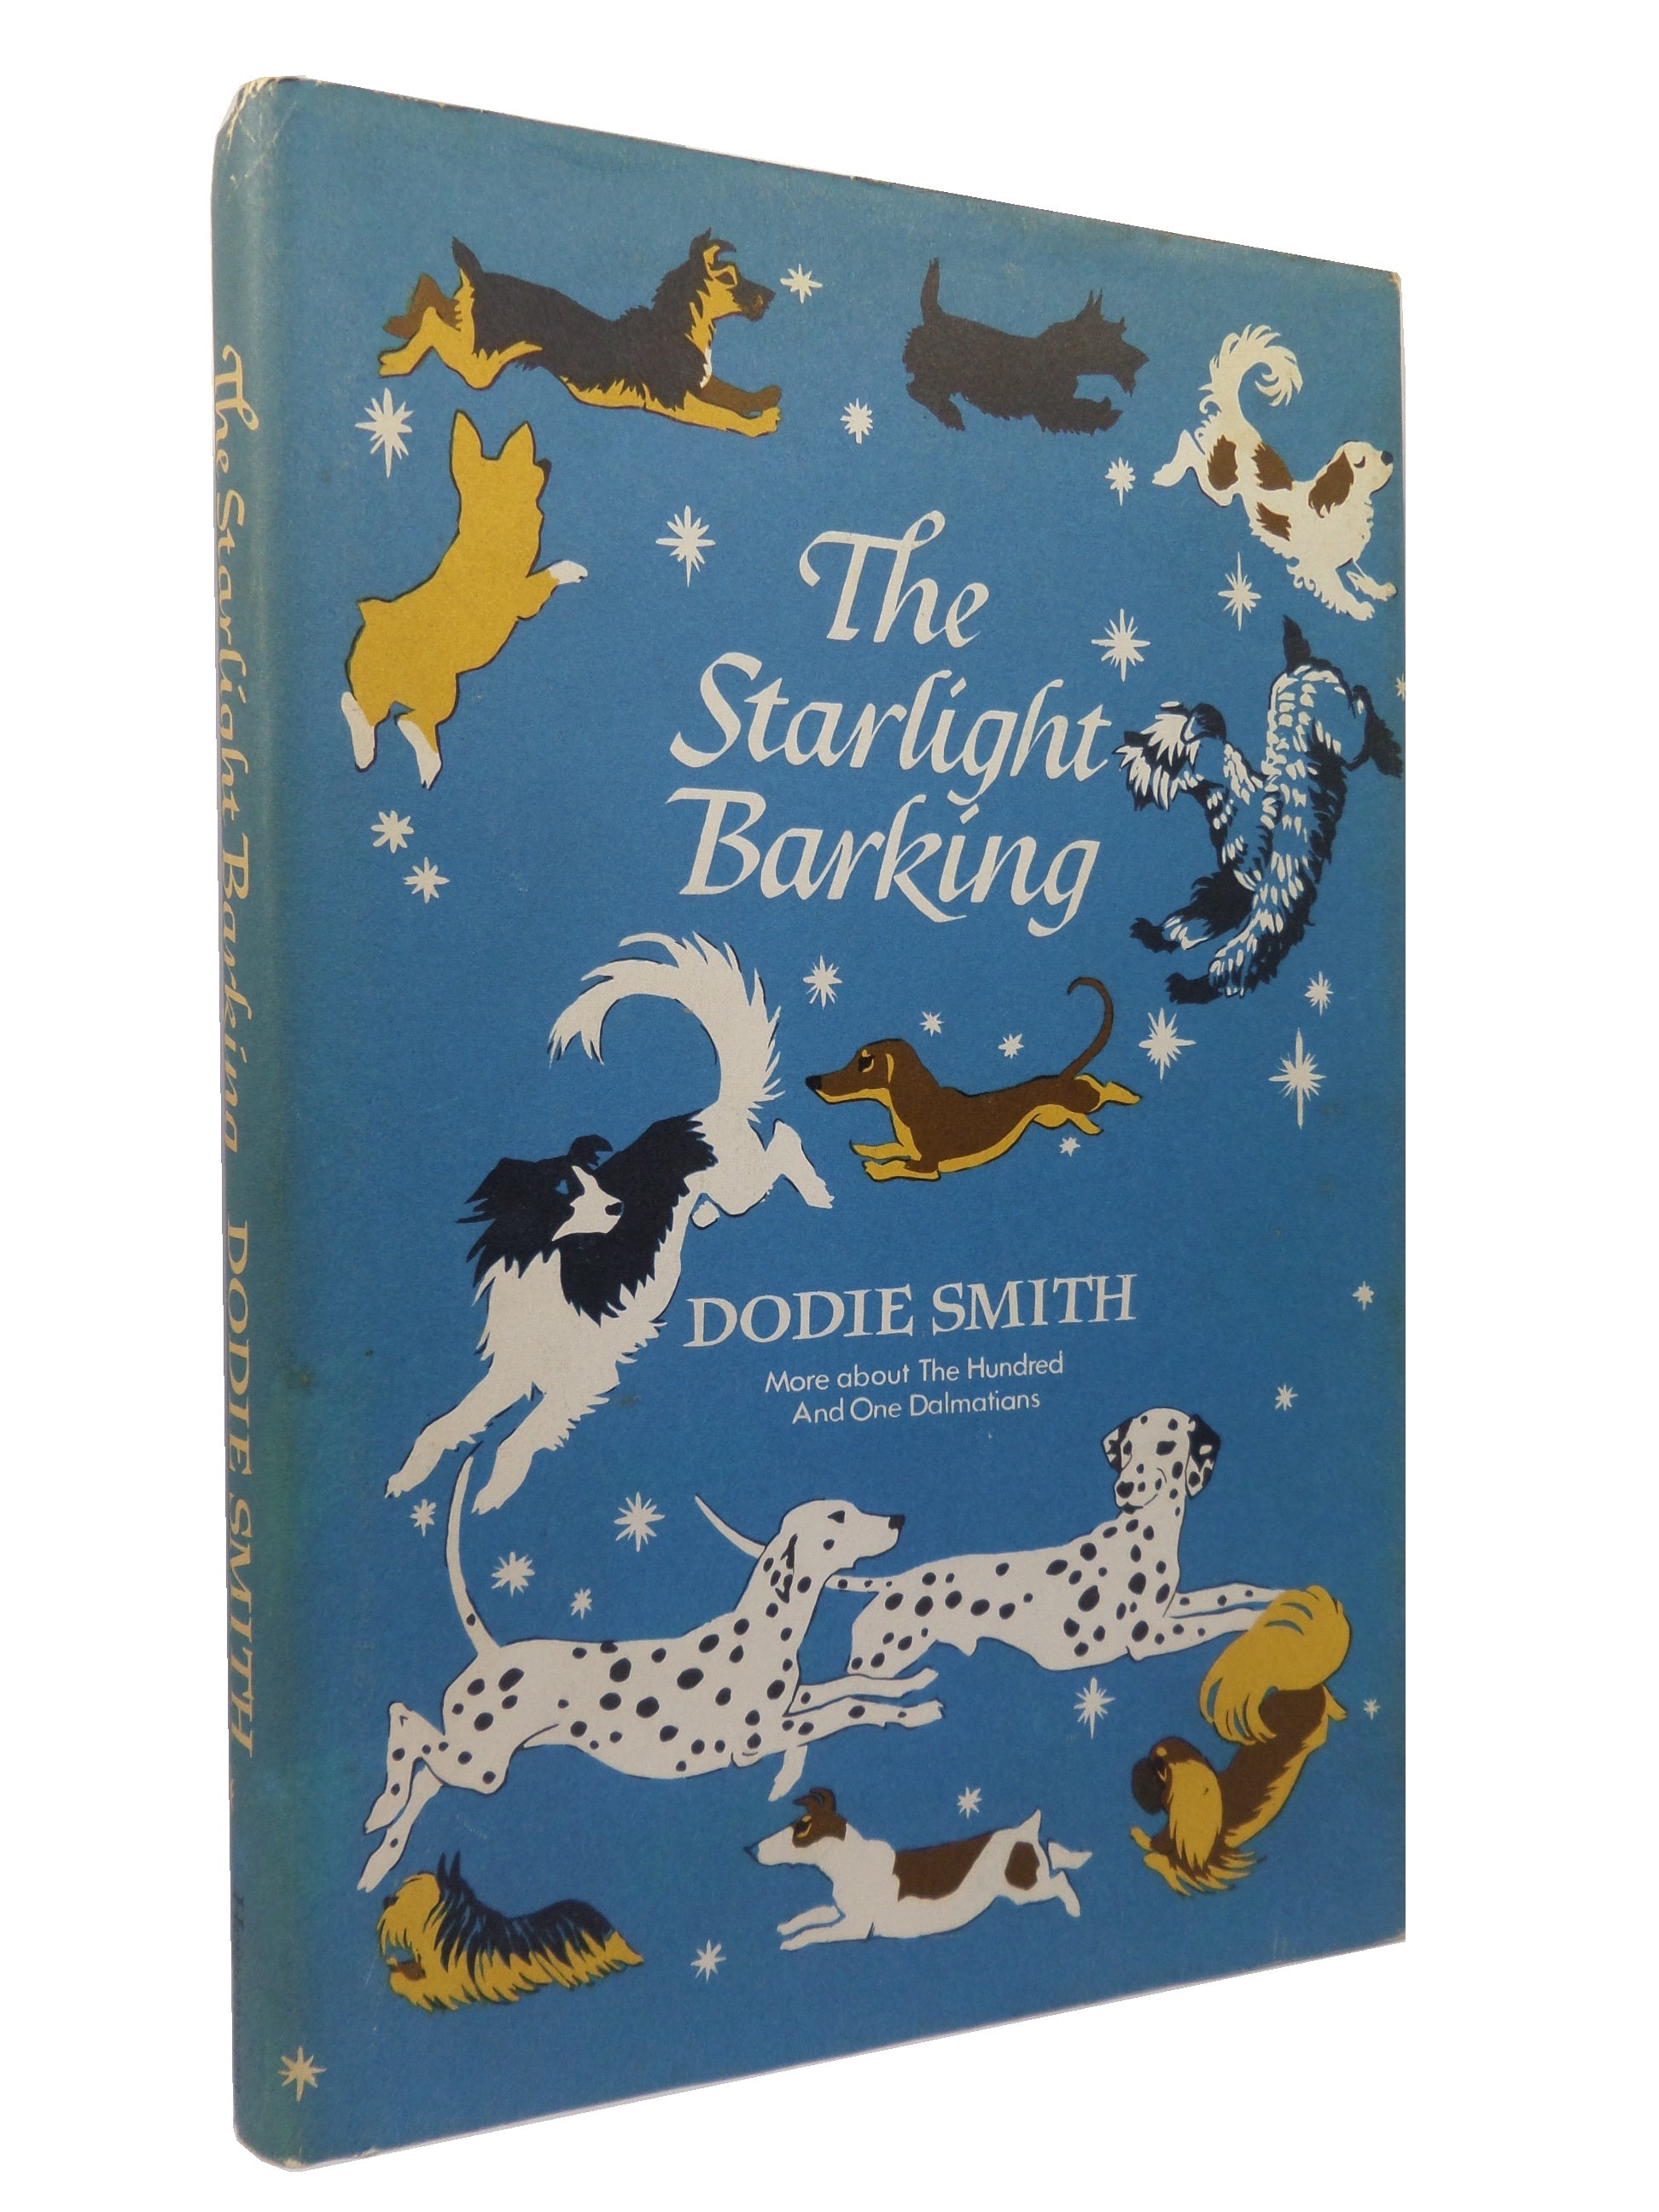 THE STARLIGHT BARKING BY DODIE SMITH 1967 FIRST EDITION